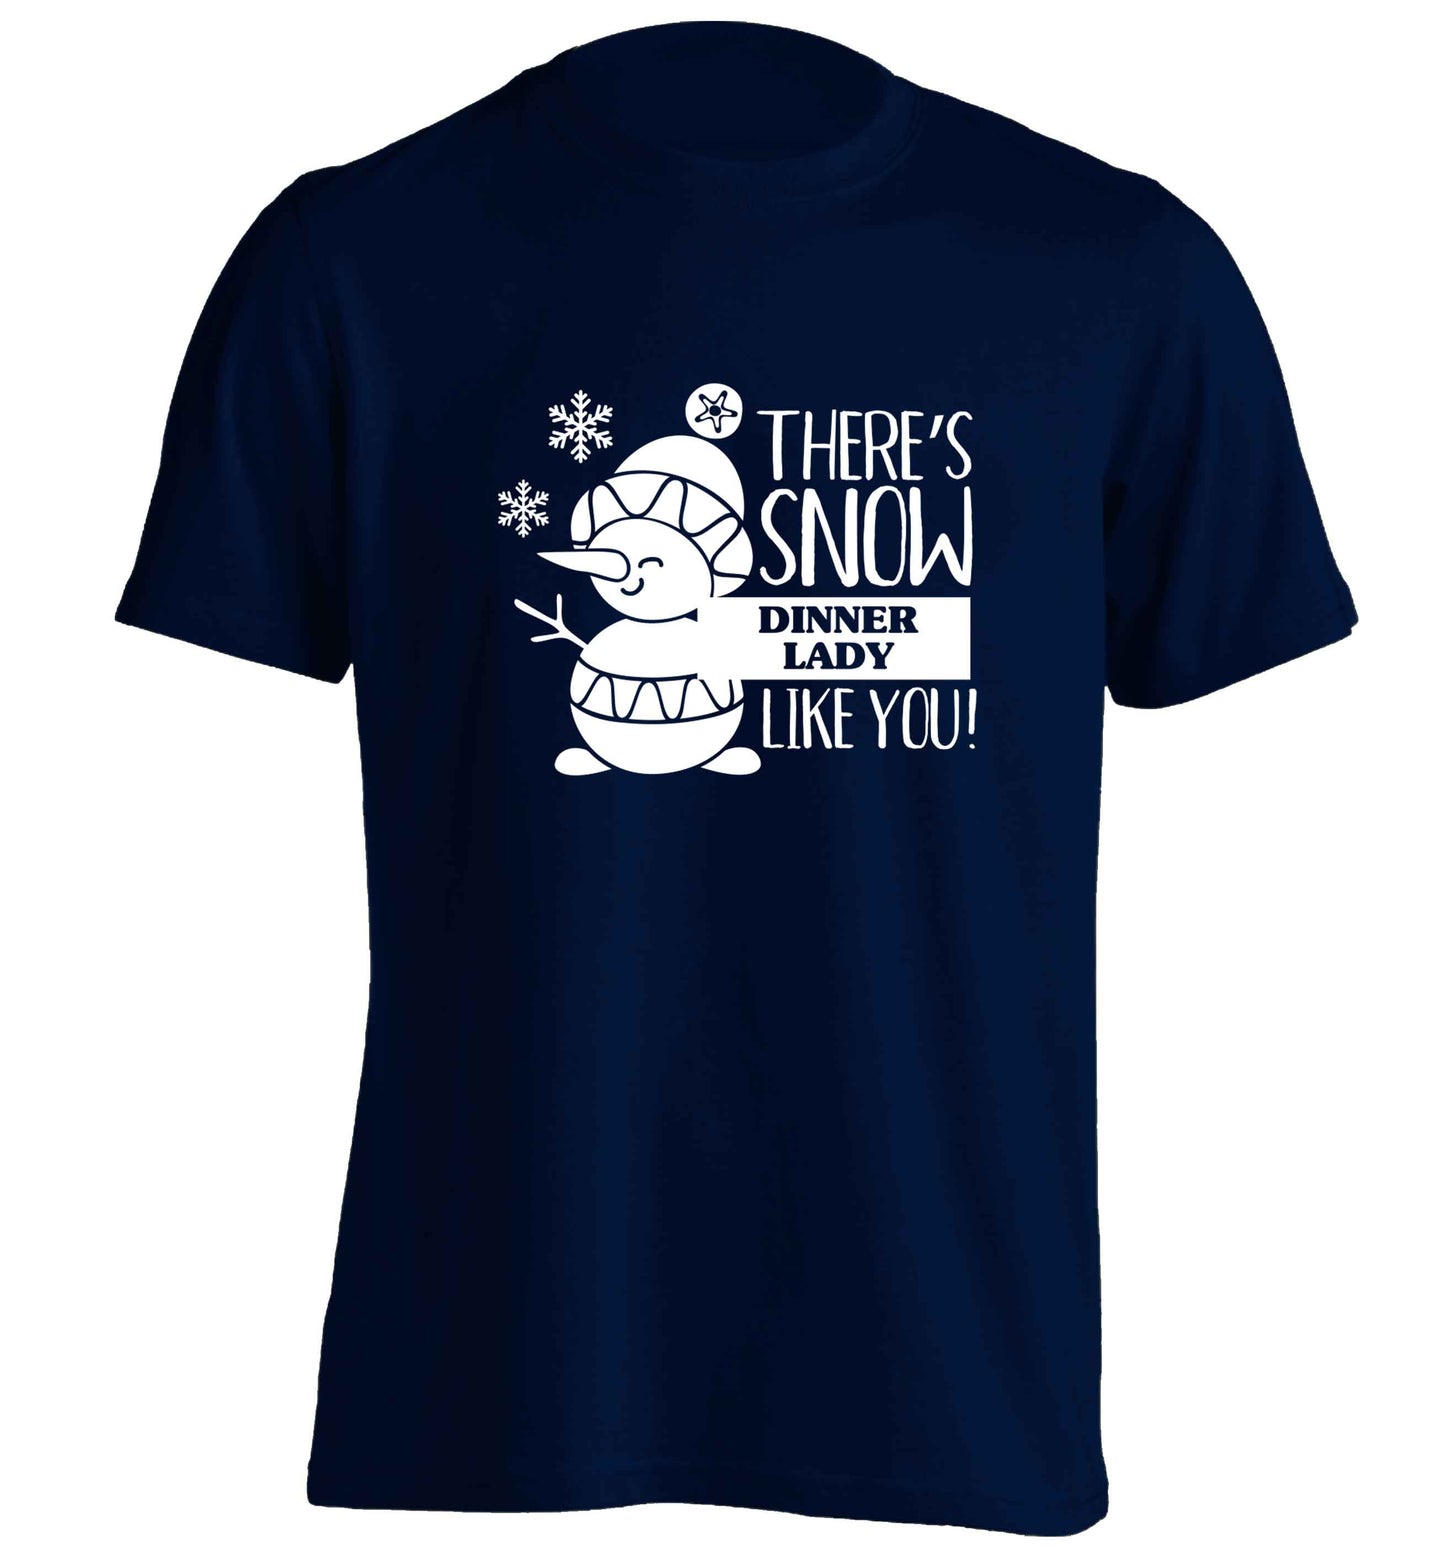 There's snow dinner lady like you adults unisex navy Tshirt 2XL